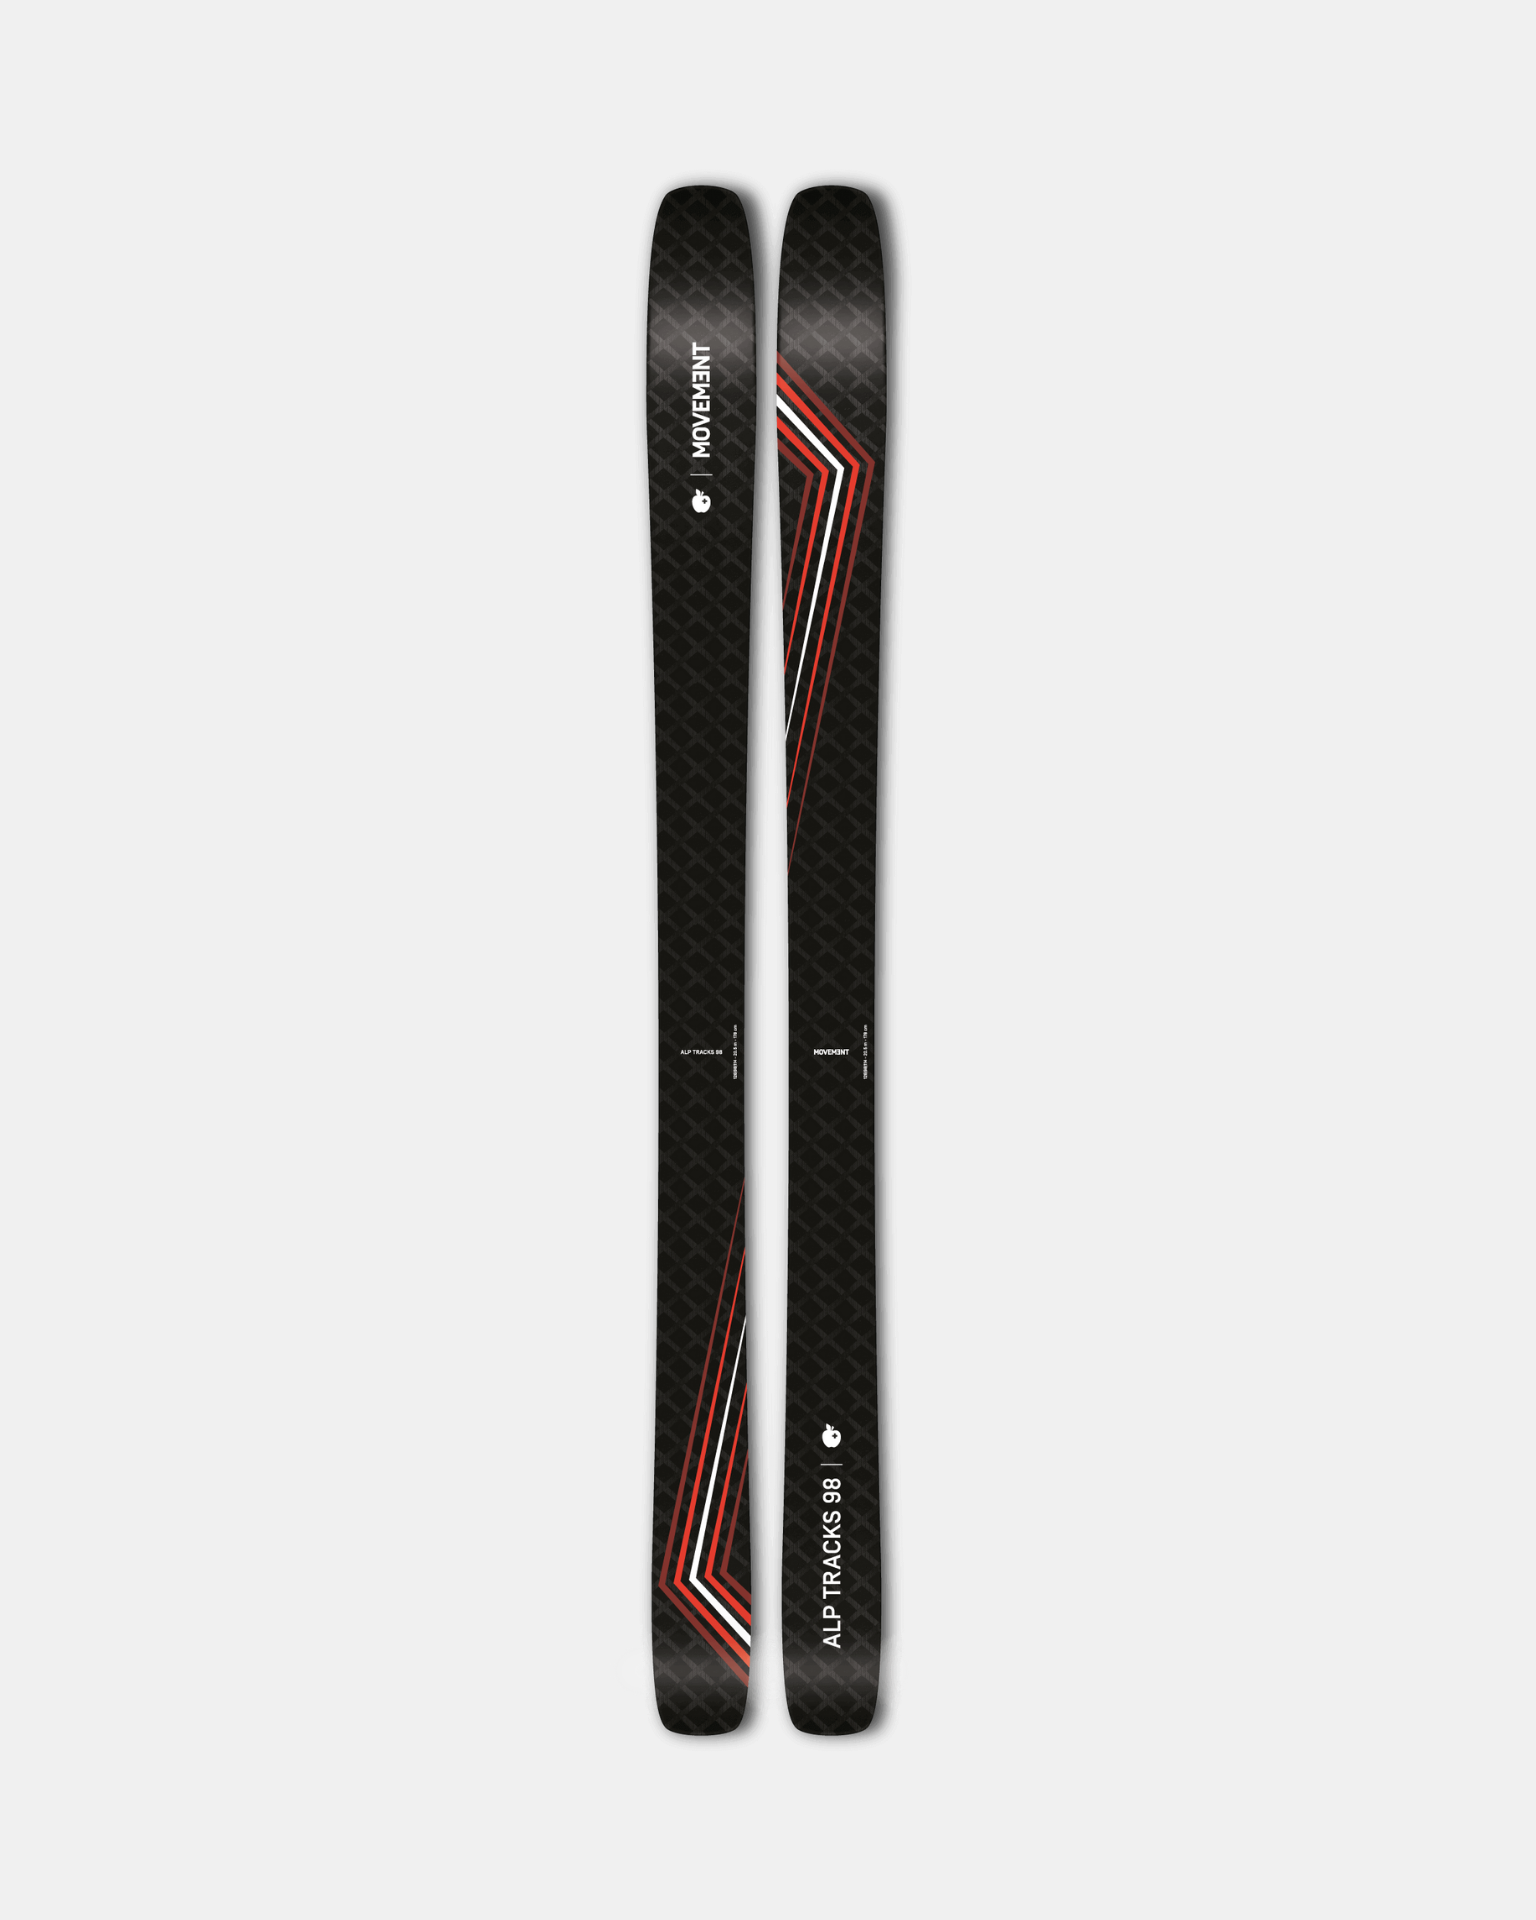 Choose Movement for top-tier touring performance - Alp Tracks 98 skis.